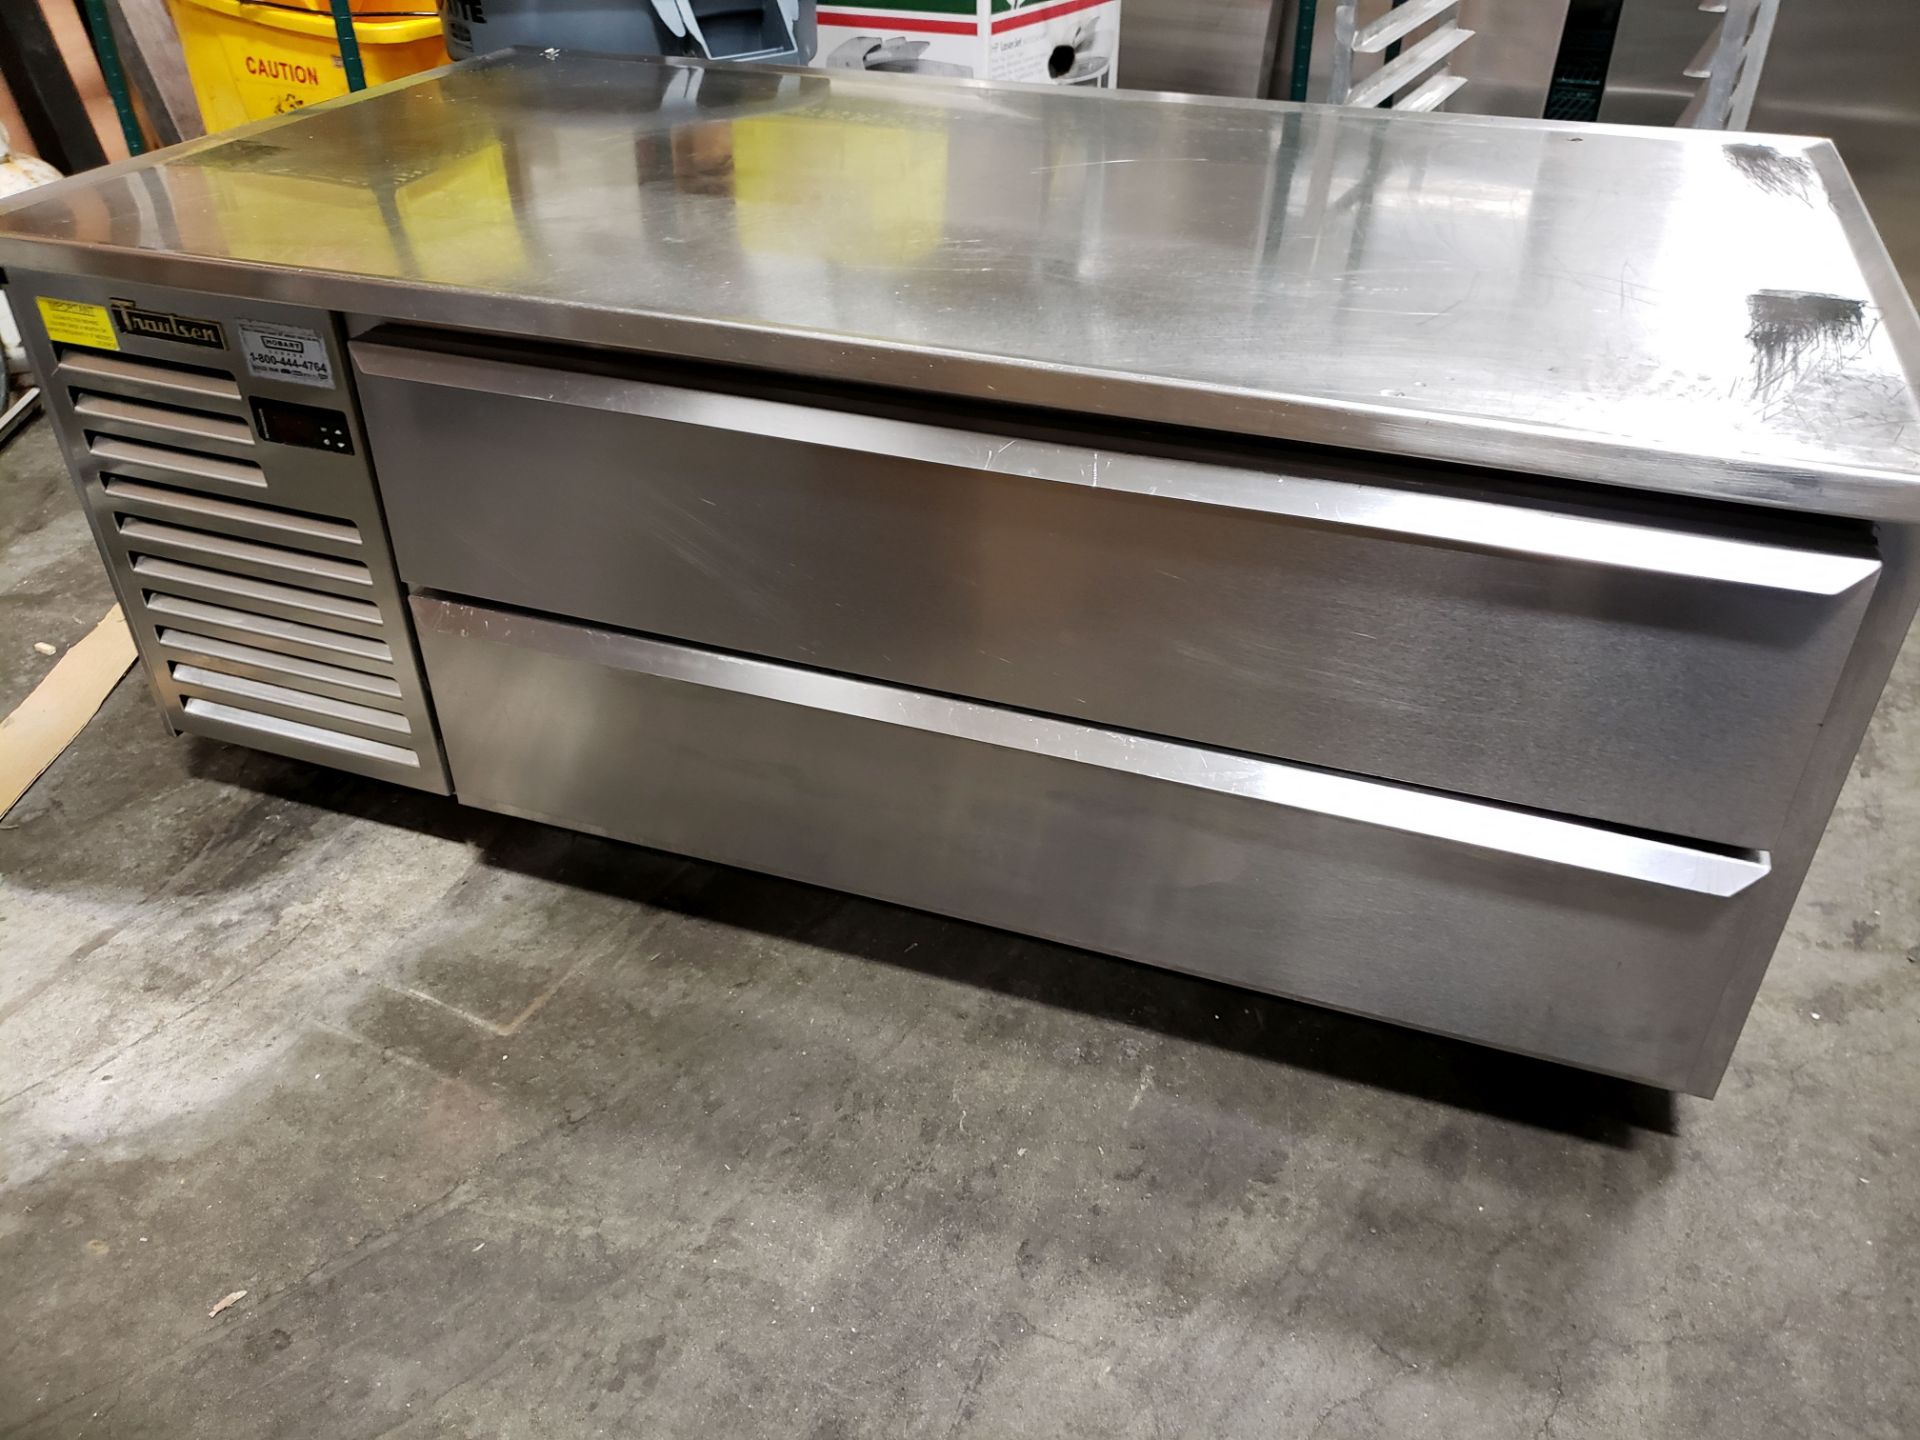 Traulsen 2 Drawer Refrigerated Equipment Stand - Model TE060HT